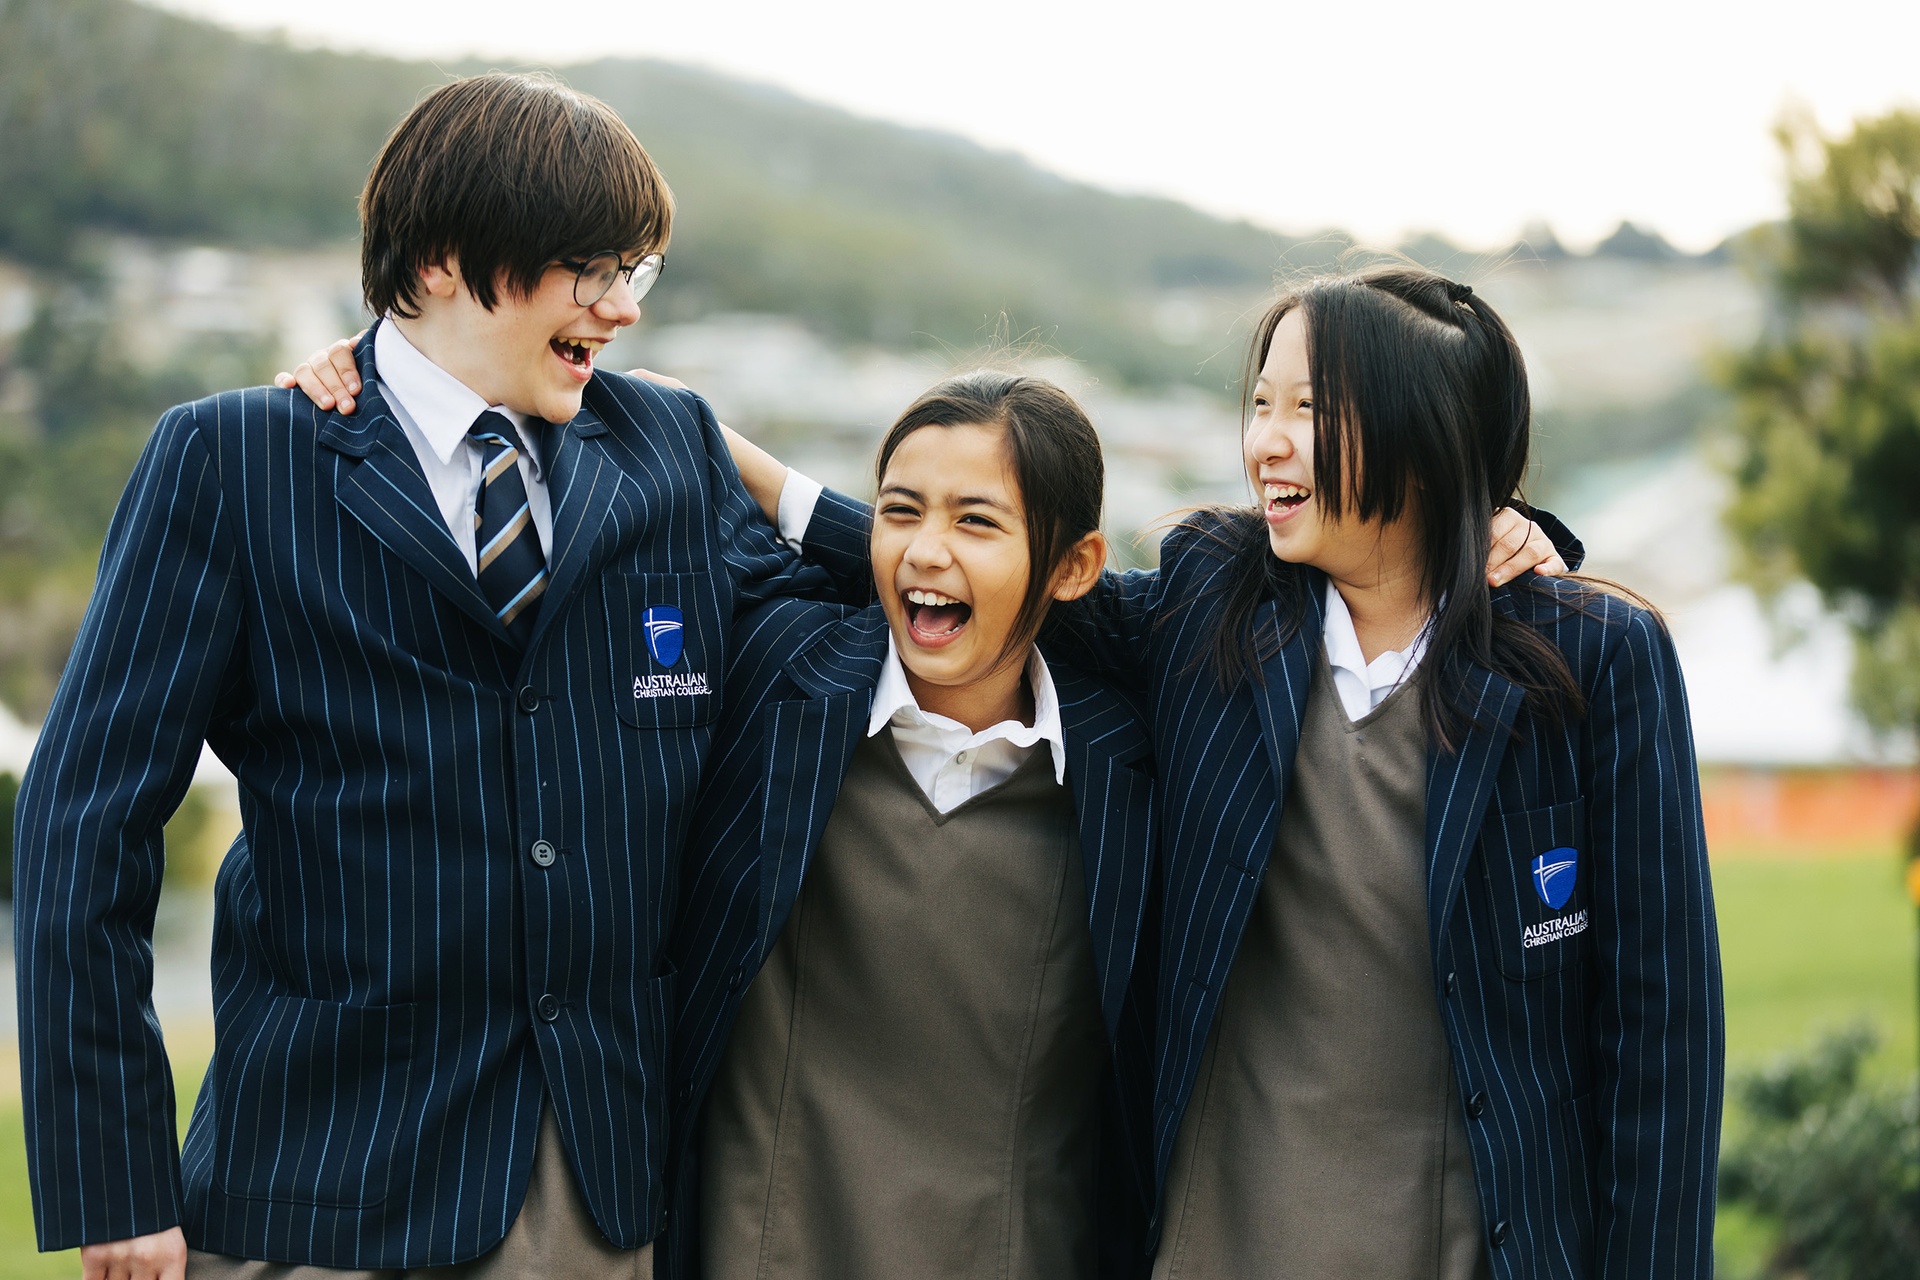 ACC Hume students wearing formal winter uniform laughing together with arms around one another